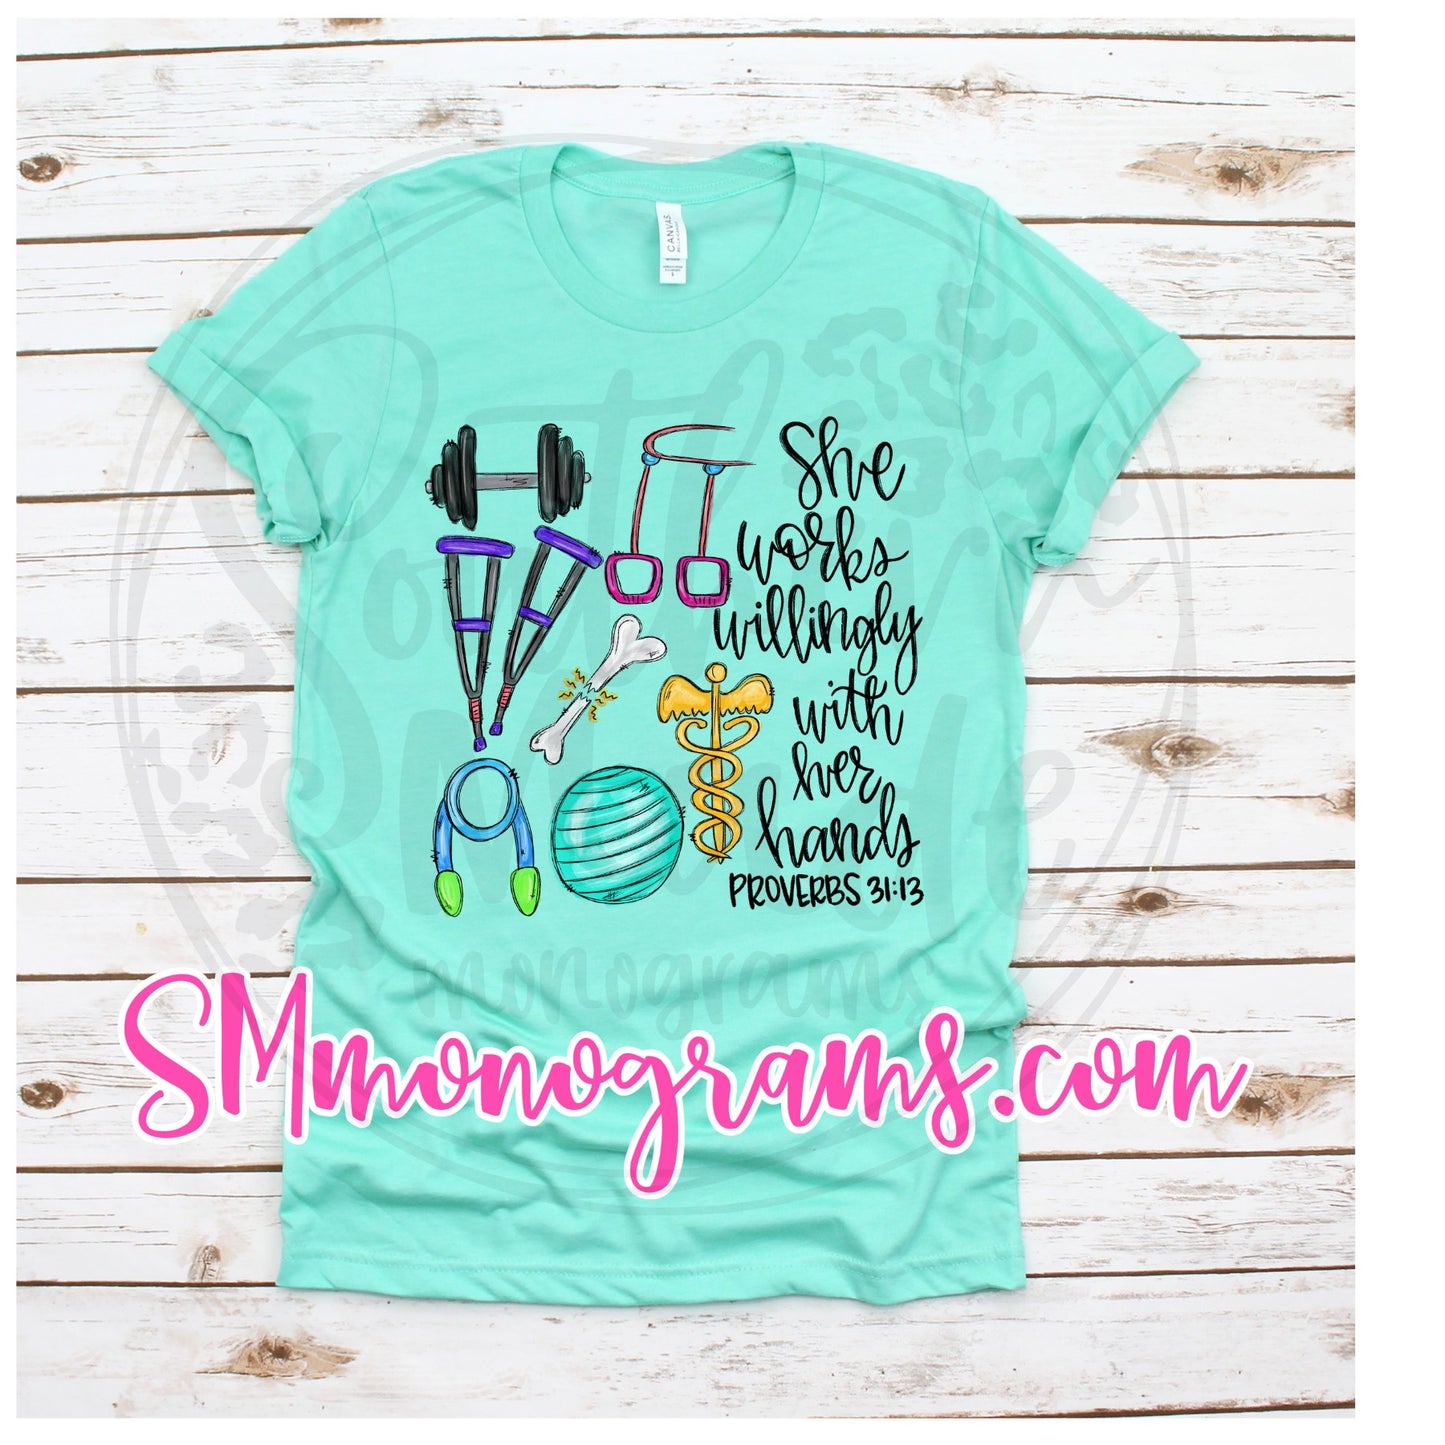 Physical Therapist - She Works Willingly With Her Hands Proverbs 31:13 - Tee, Tank or Raglan